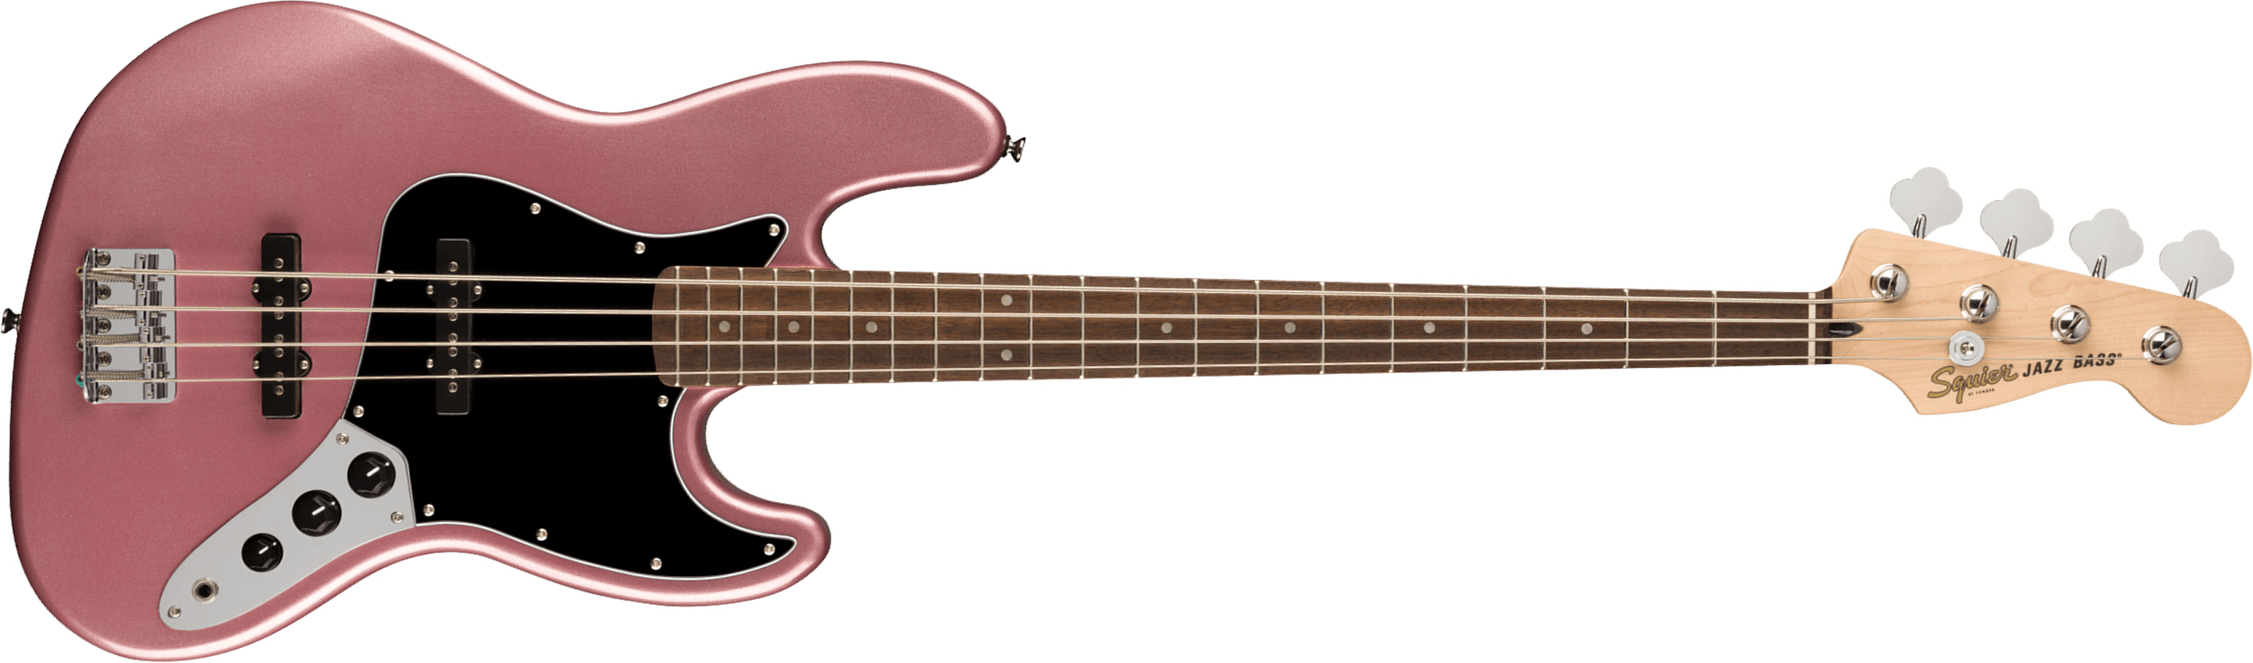 Squier Jazz Bass Affinity 2021 Lau - Burgundy Mist - Solid body electric bass - Main picture